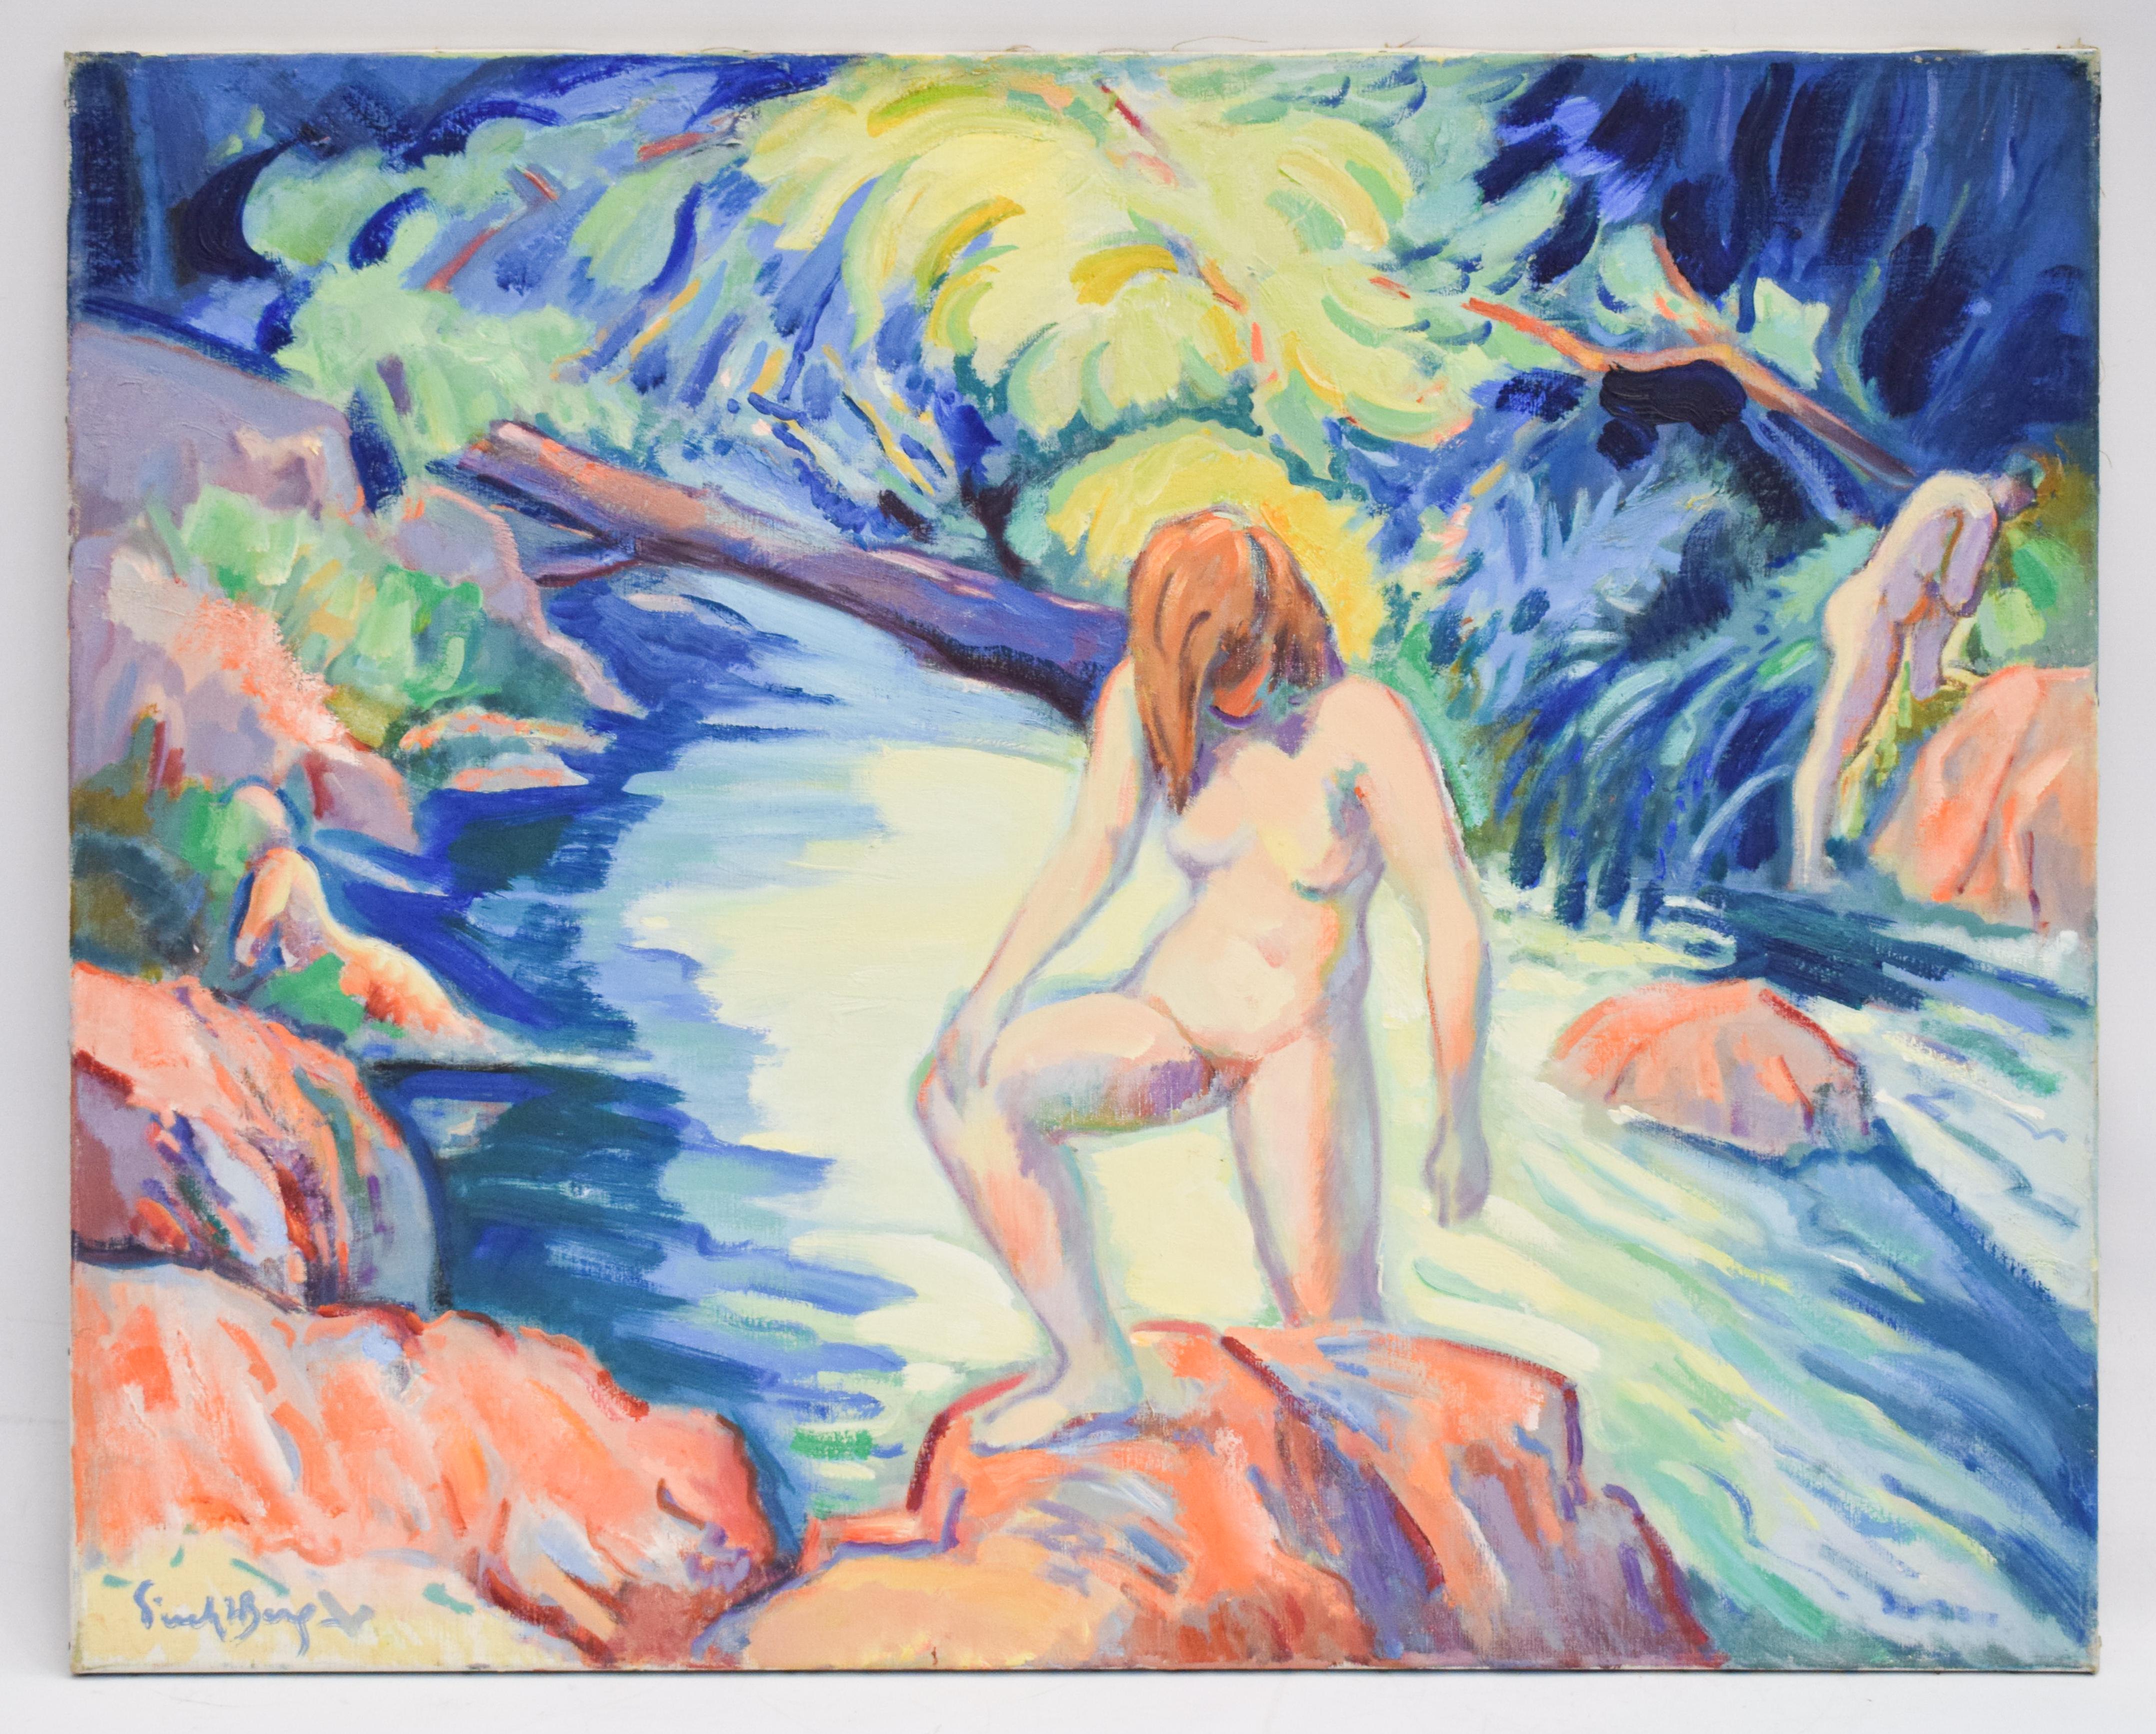  Nude portrait in nature - Oil Paint on Canvas, Fauvist, Dutch Artist, Painting - Gray Nude Painting by Freek van den Berg